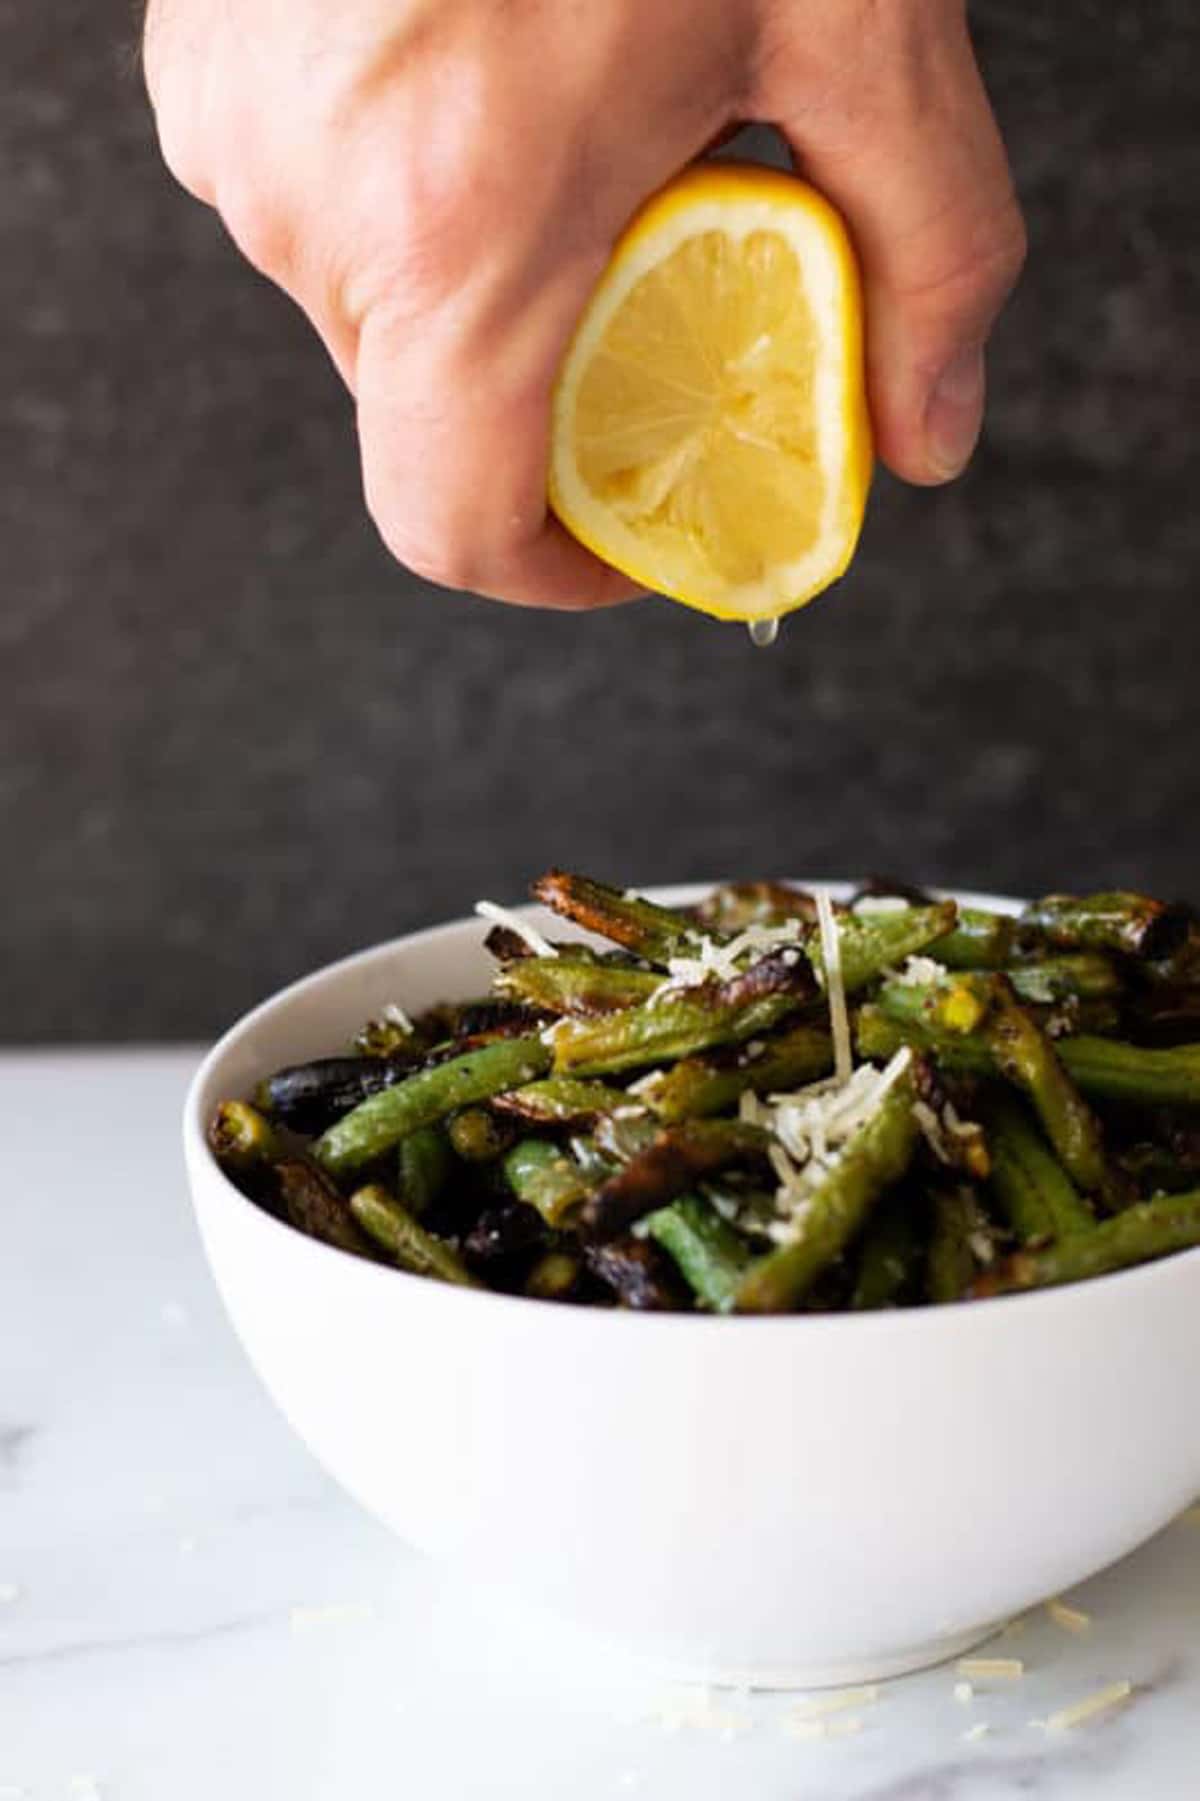 Fresh lemon being squeezed into a bowl of green beans. 